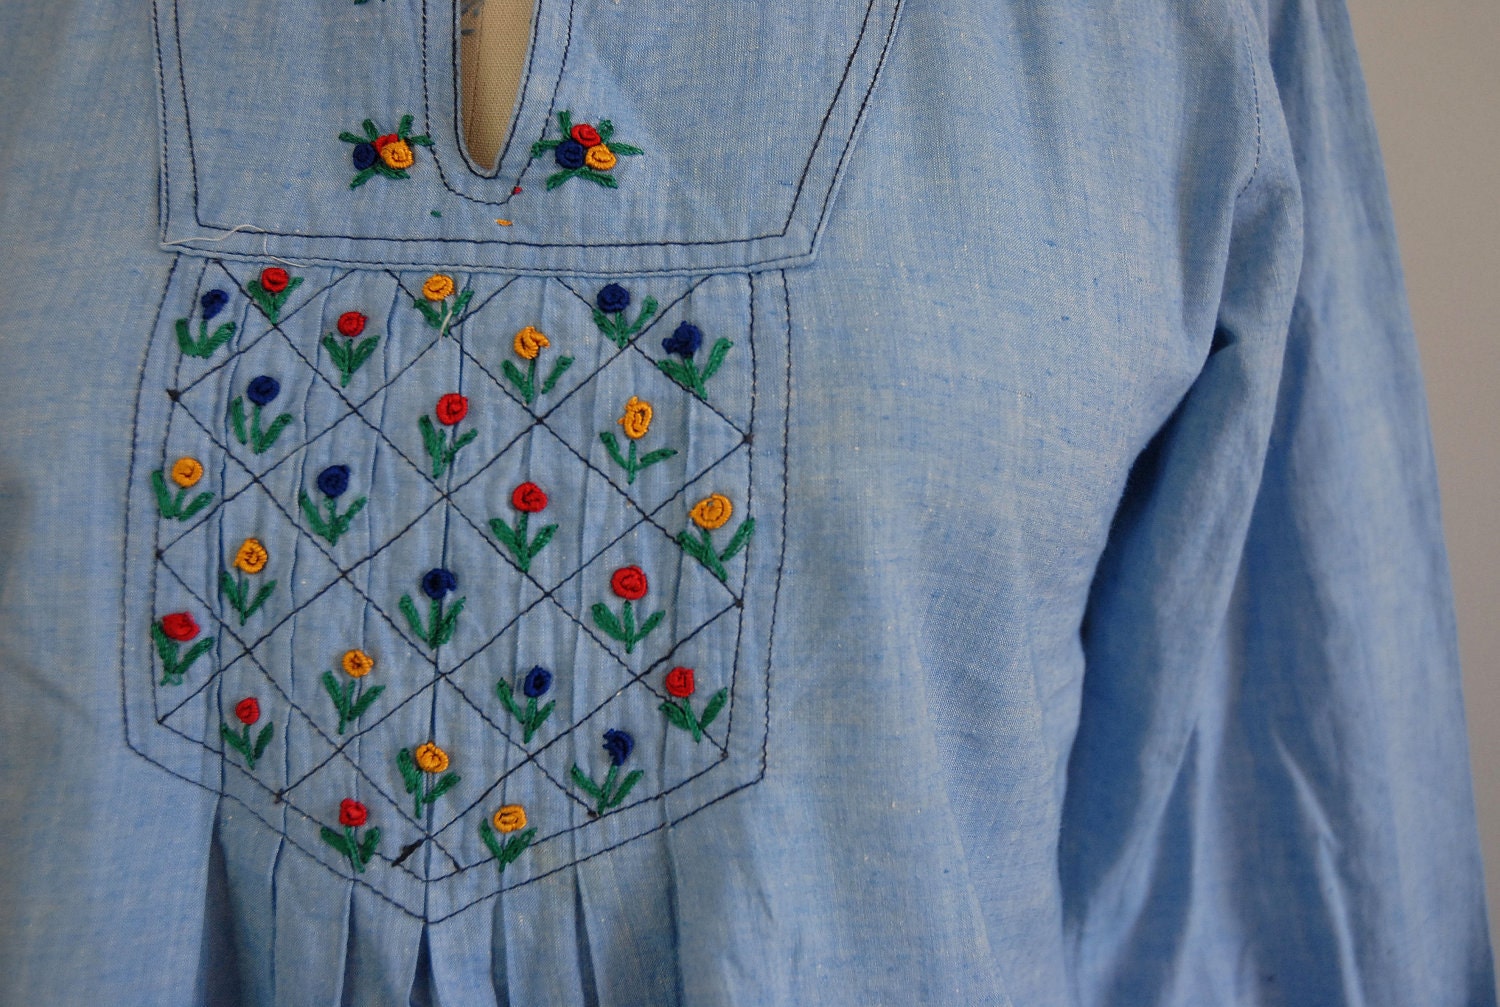 Chambray Blouse / 70s Peasant Top / Floral